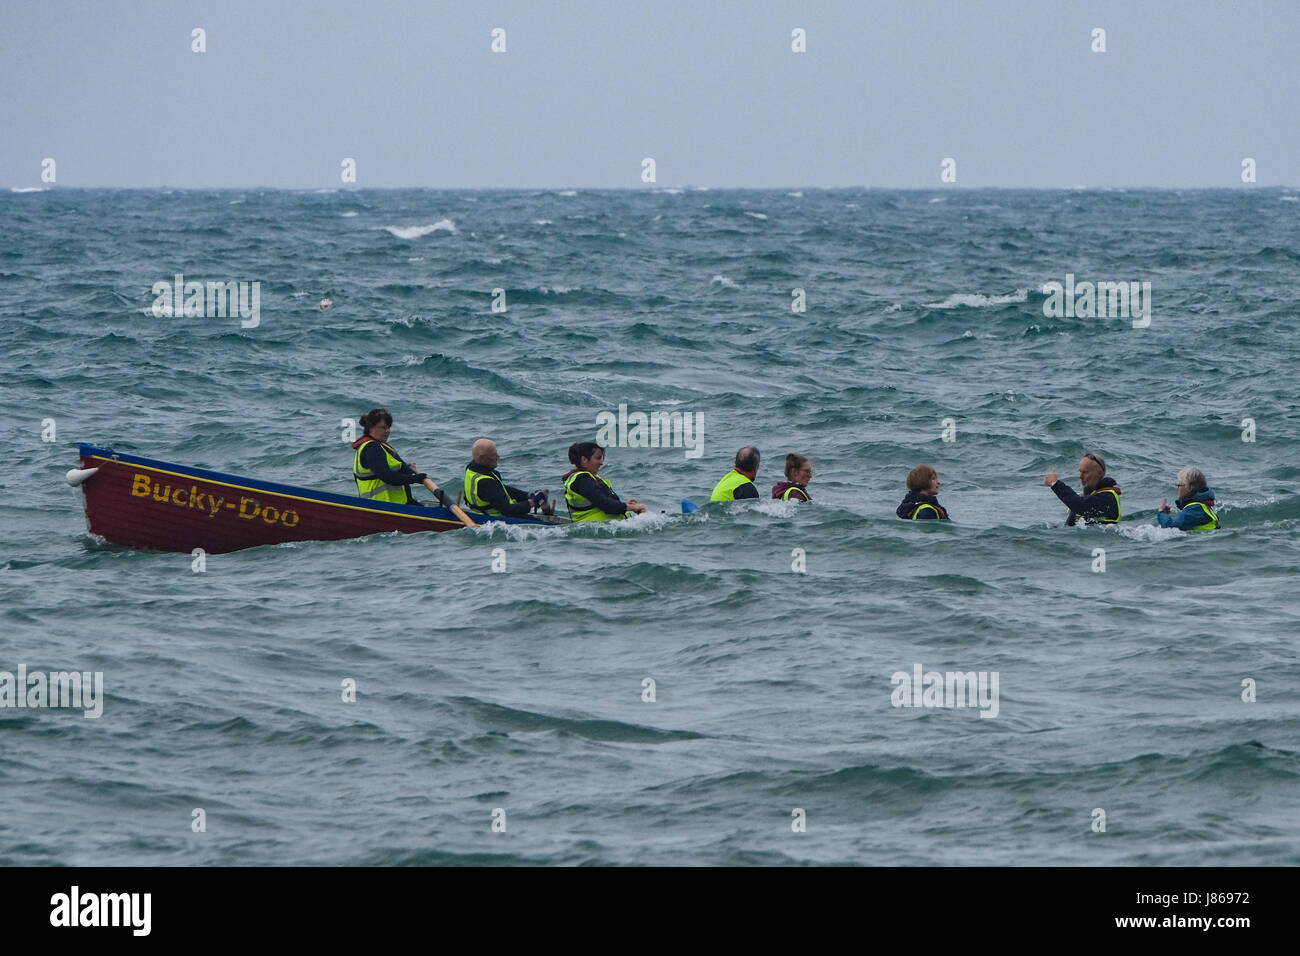 West Bay, Dorset, UK. 27th May, 2017. Bridport Gig club members take the 'Bucky-Doo' gig out in decidedly choppy waters after a night of thunder and rain on the Dorset coast. Gig racing is a rapidly expanding sport. There are over 50 clubs and some 140 boats in the South West of England. Credit: Tom Corban/Alamy Live News Stock Photo